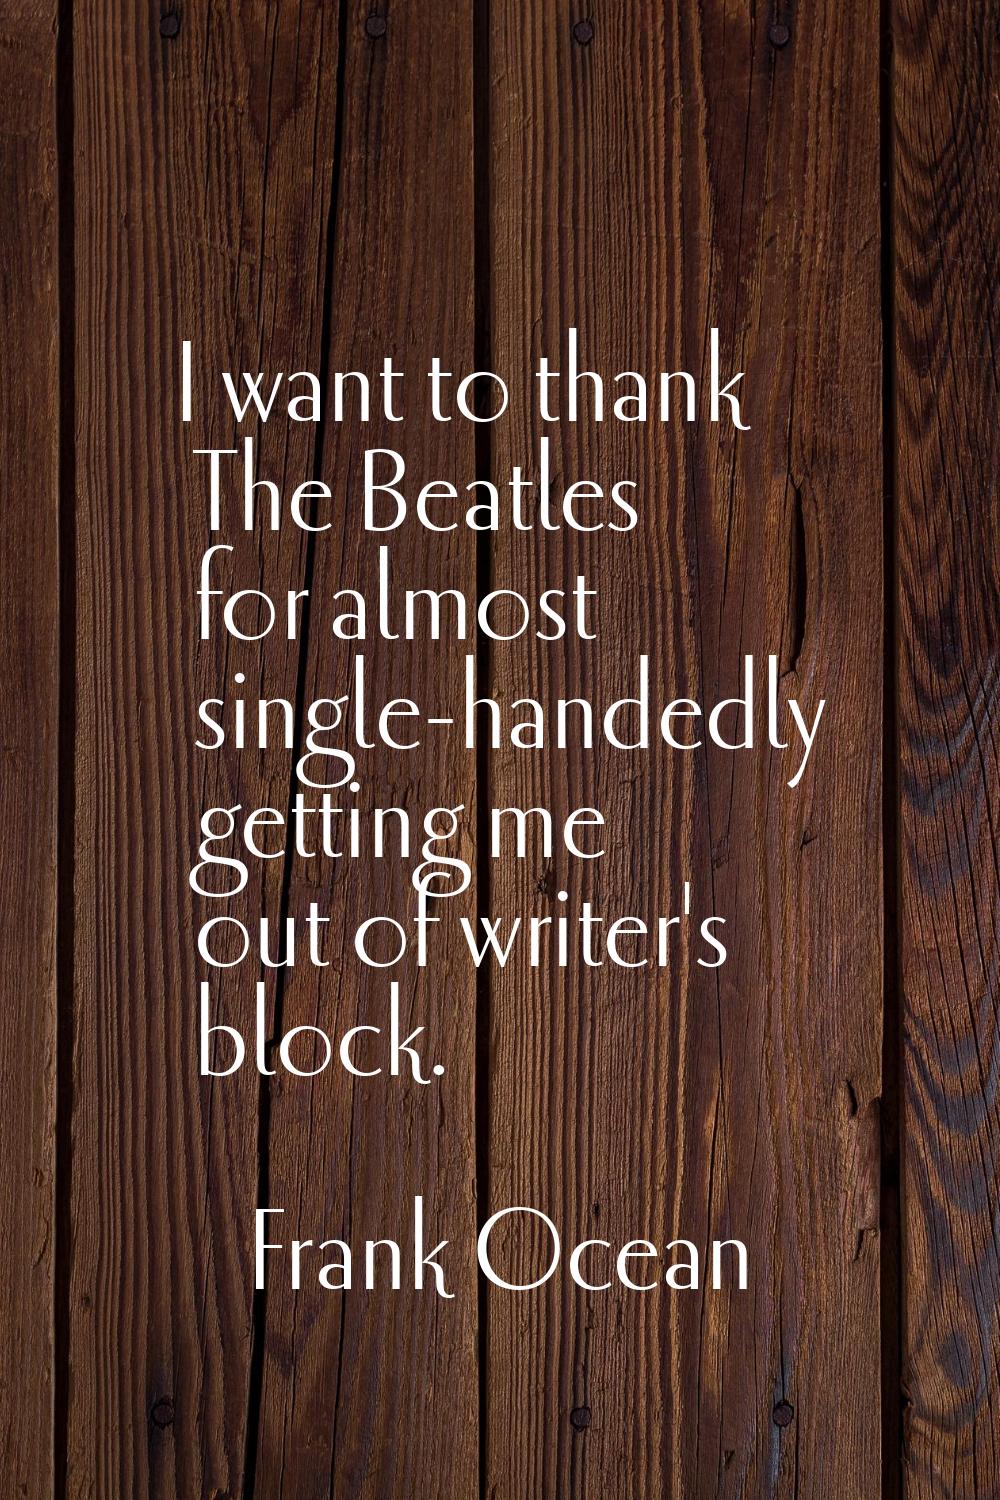 I want to thank The Beatles for almost single-handedly getting me out of writer's block.